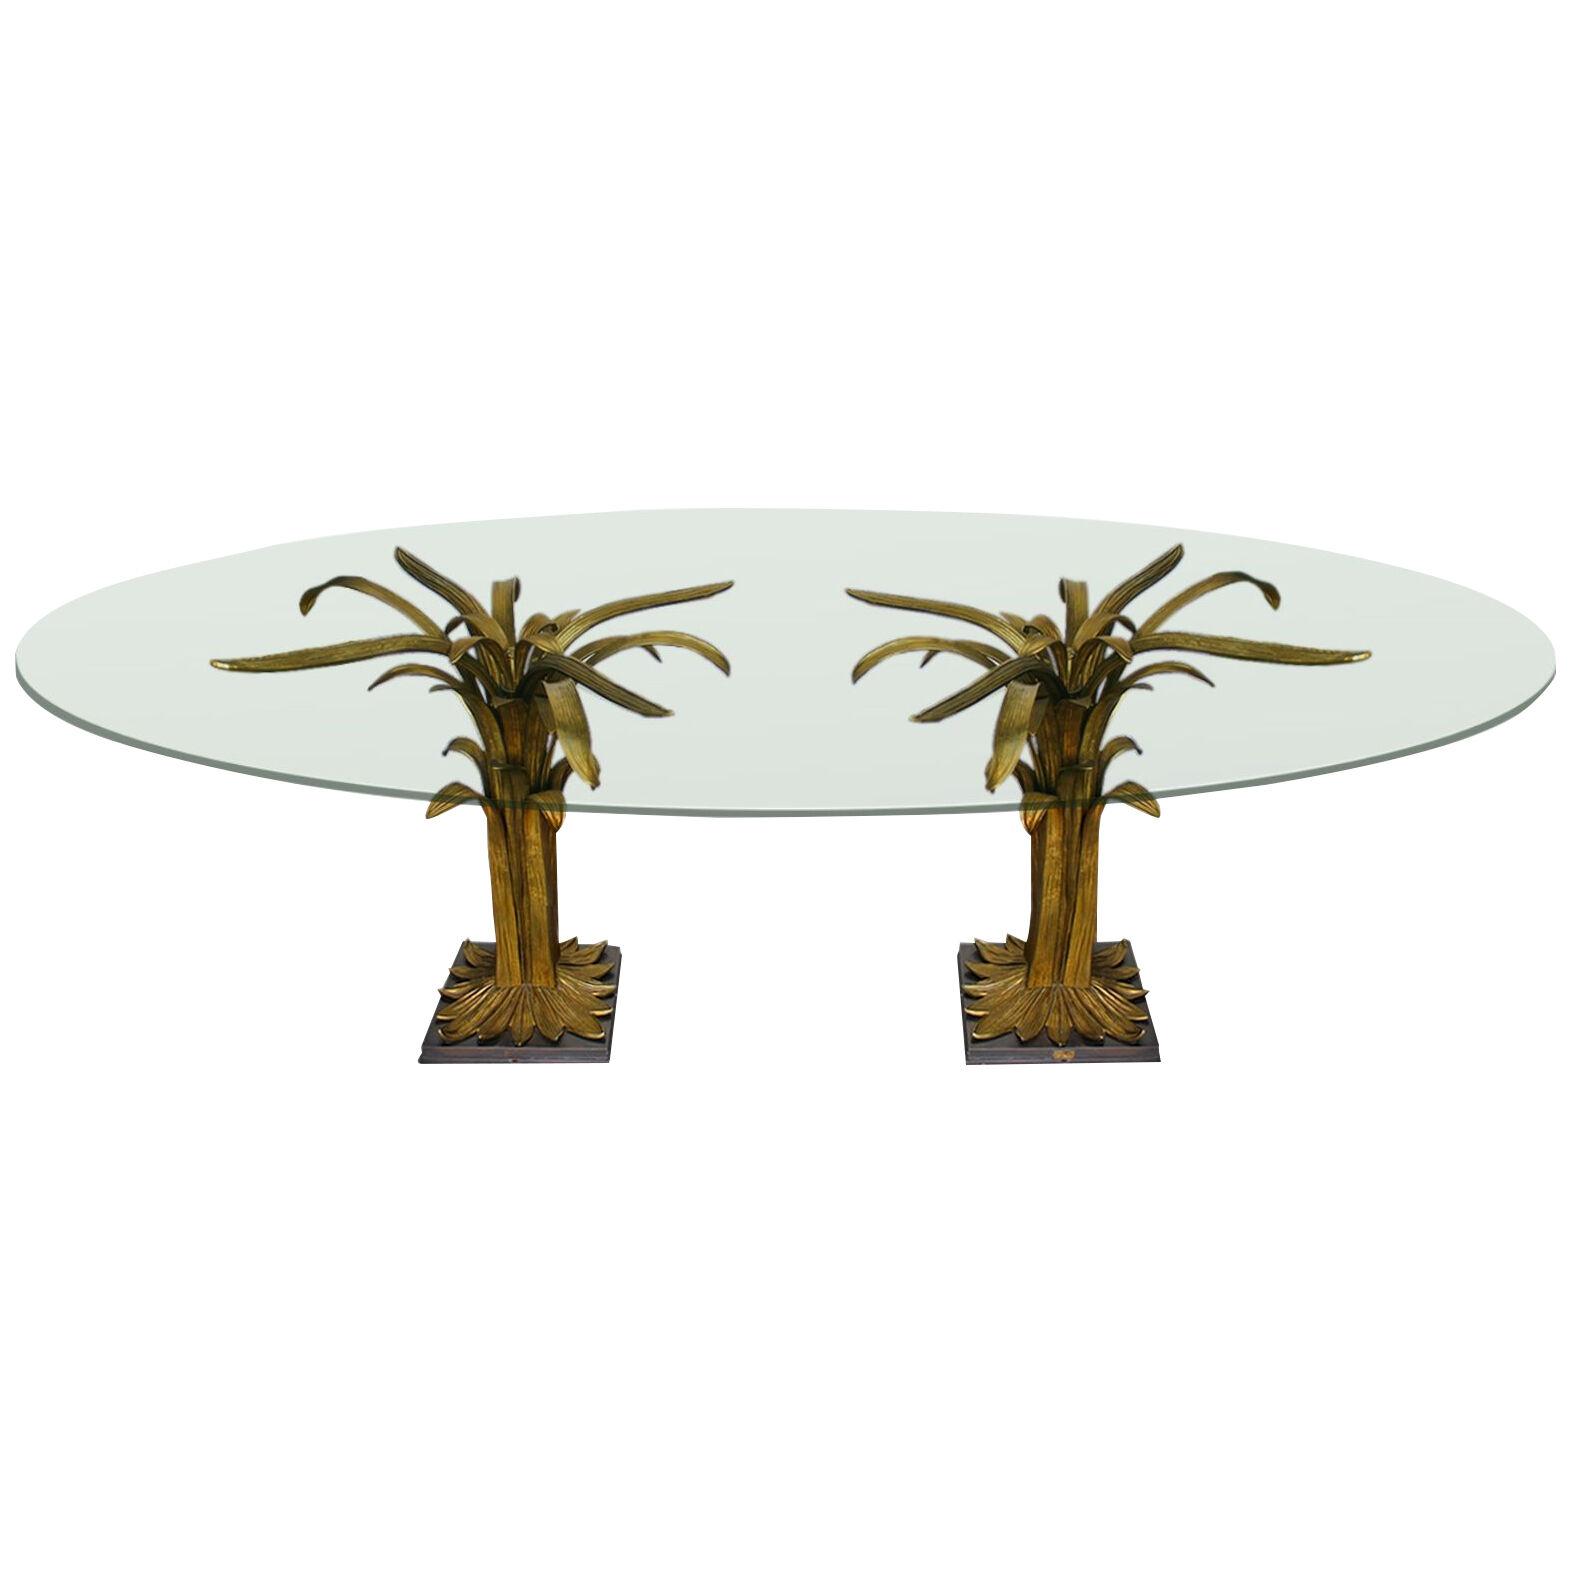 Rare table "Water Leaves", Chrystiane Charles for Maison Charles, France, 1970